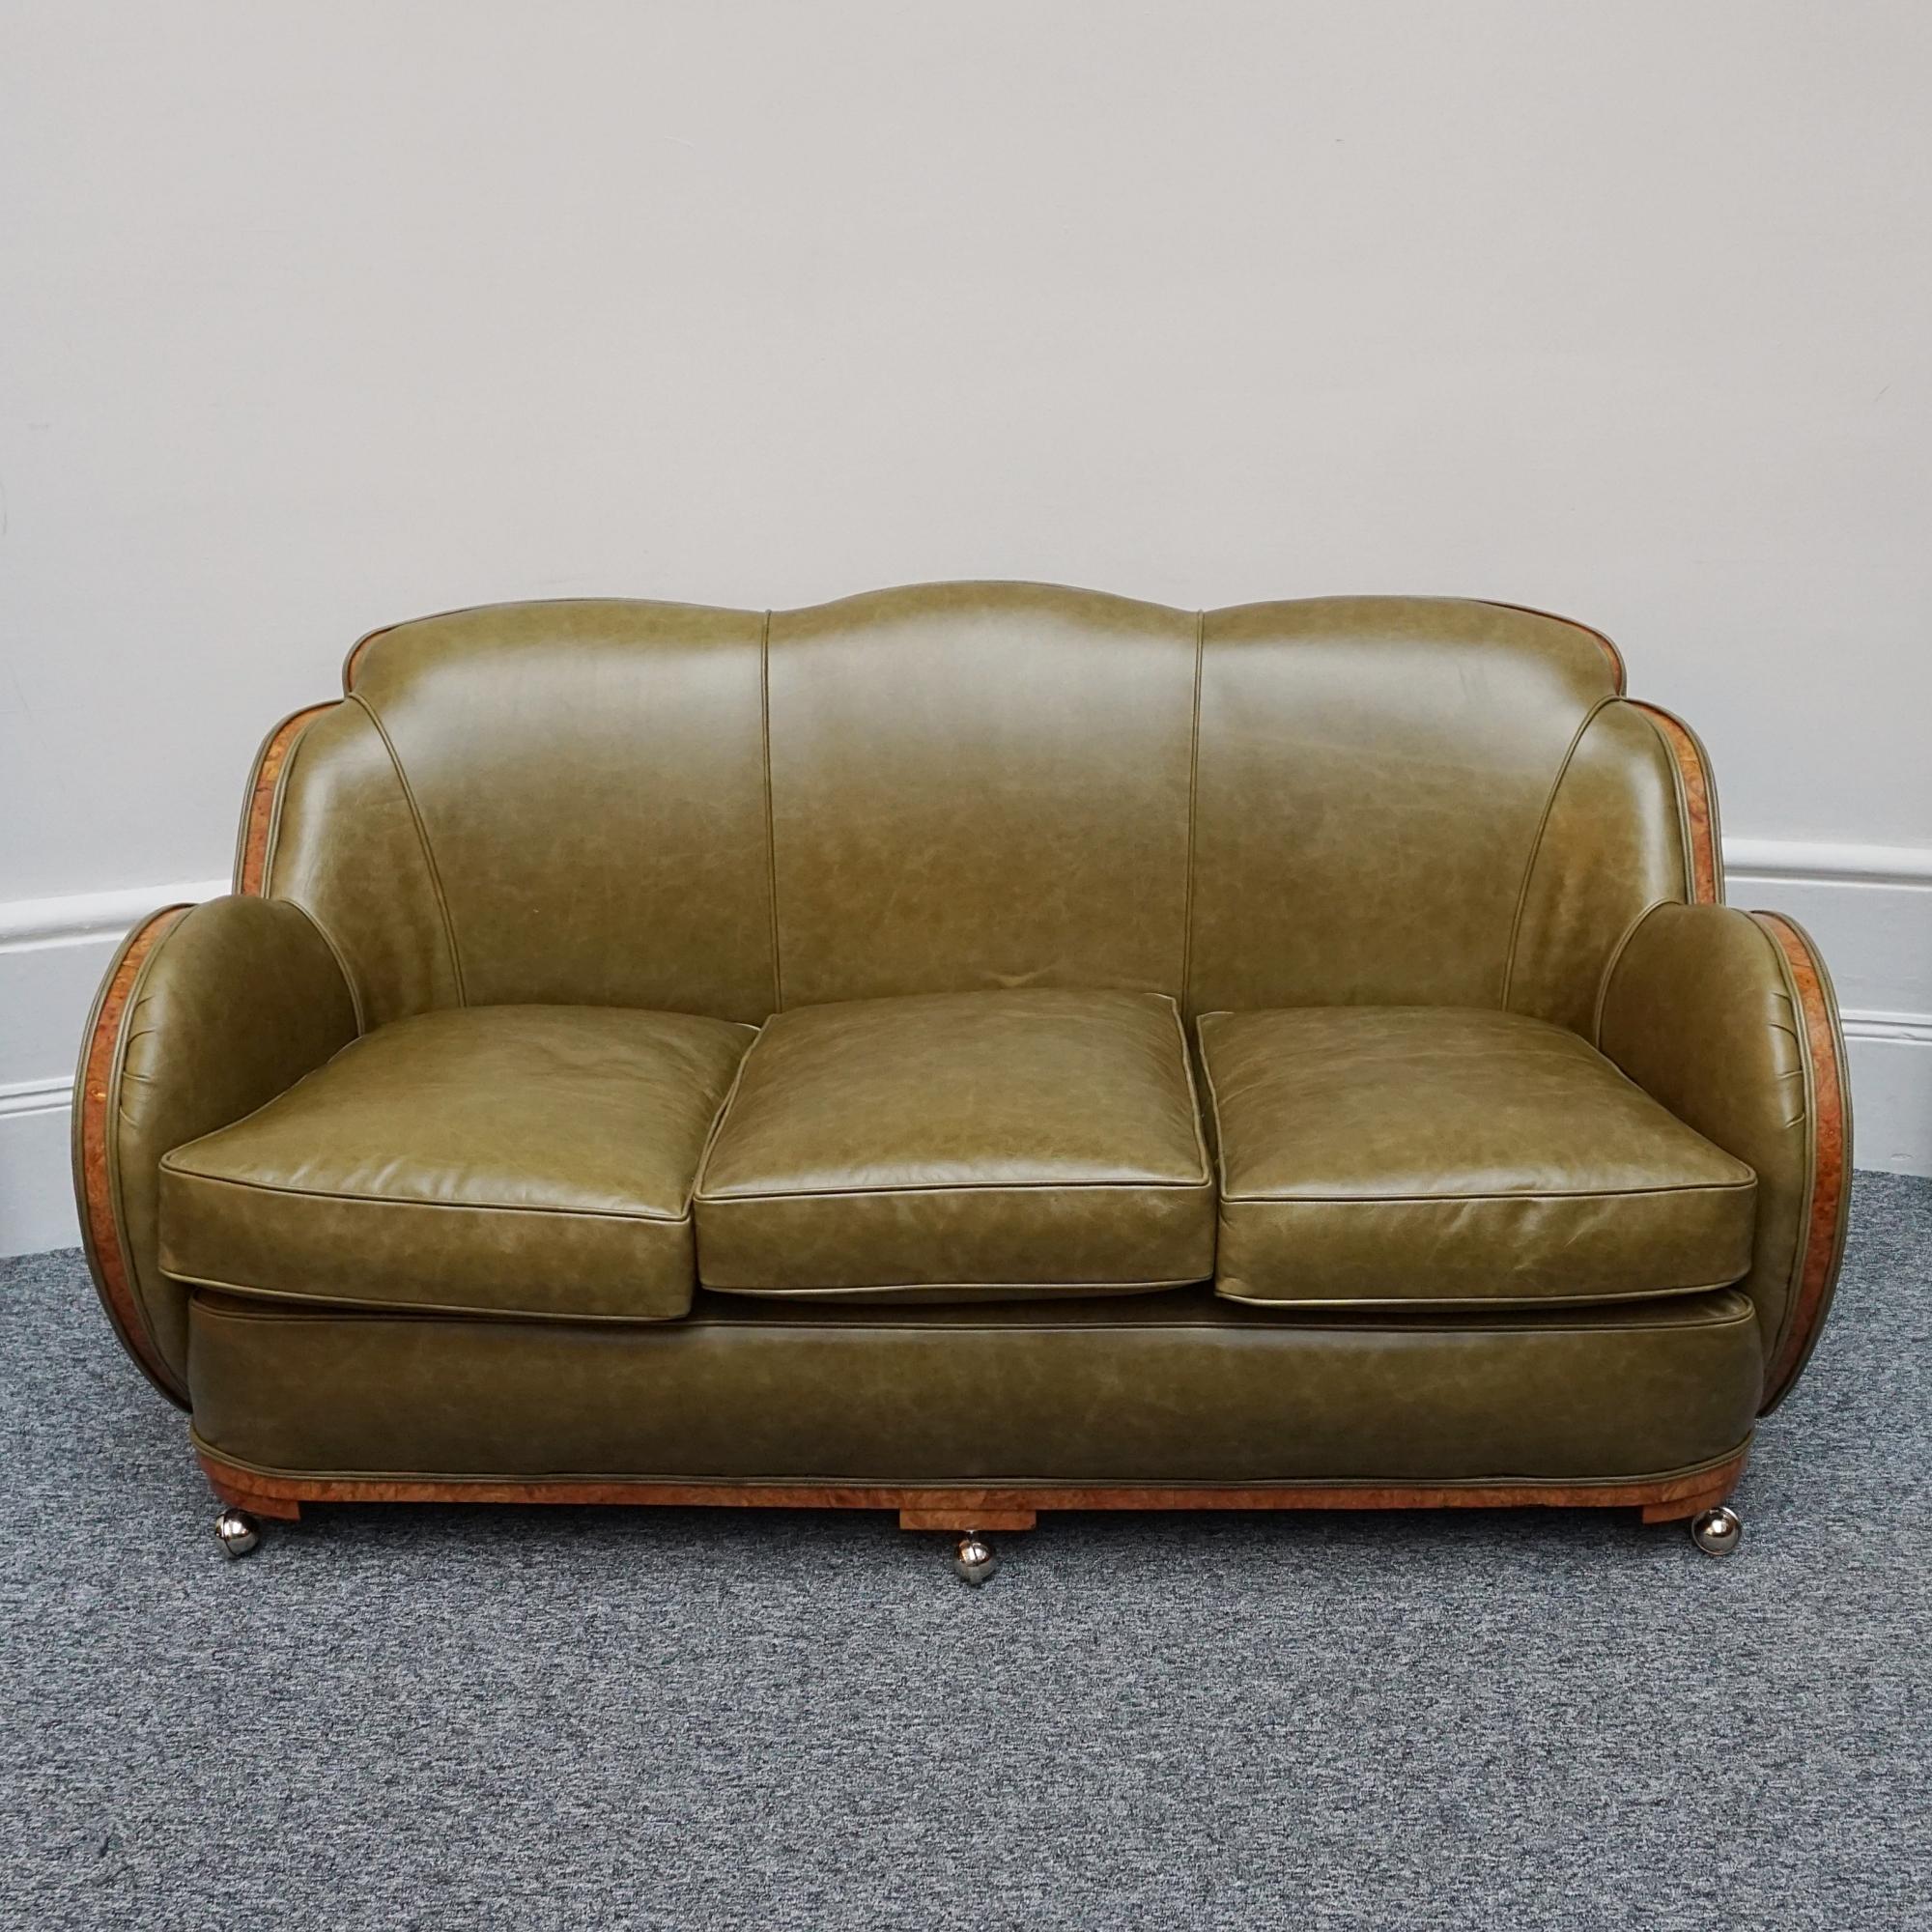 English Art Deco Cloud Sofa by Harry & Lou Epstein Upholstered in Green Leather  In Excellent Condition For Sale In Forest Row, East Sussex